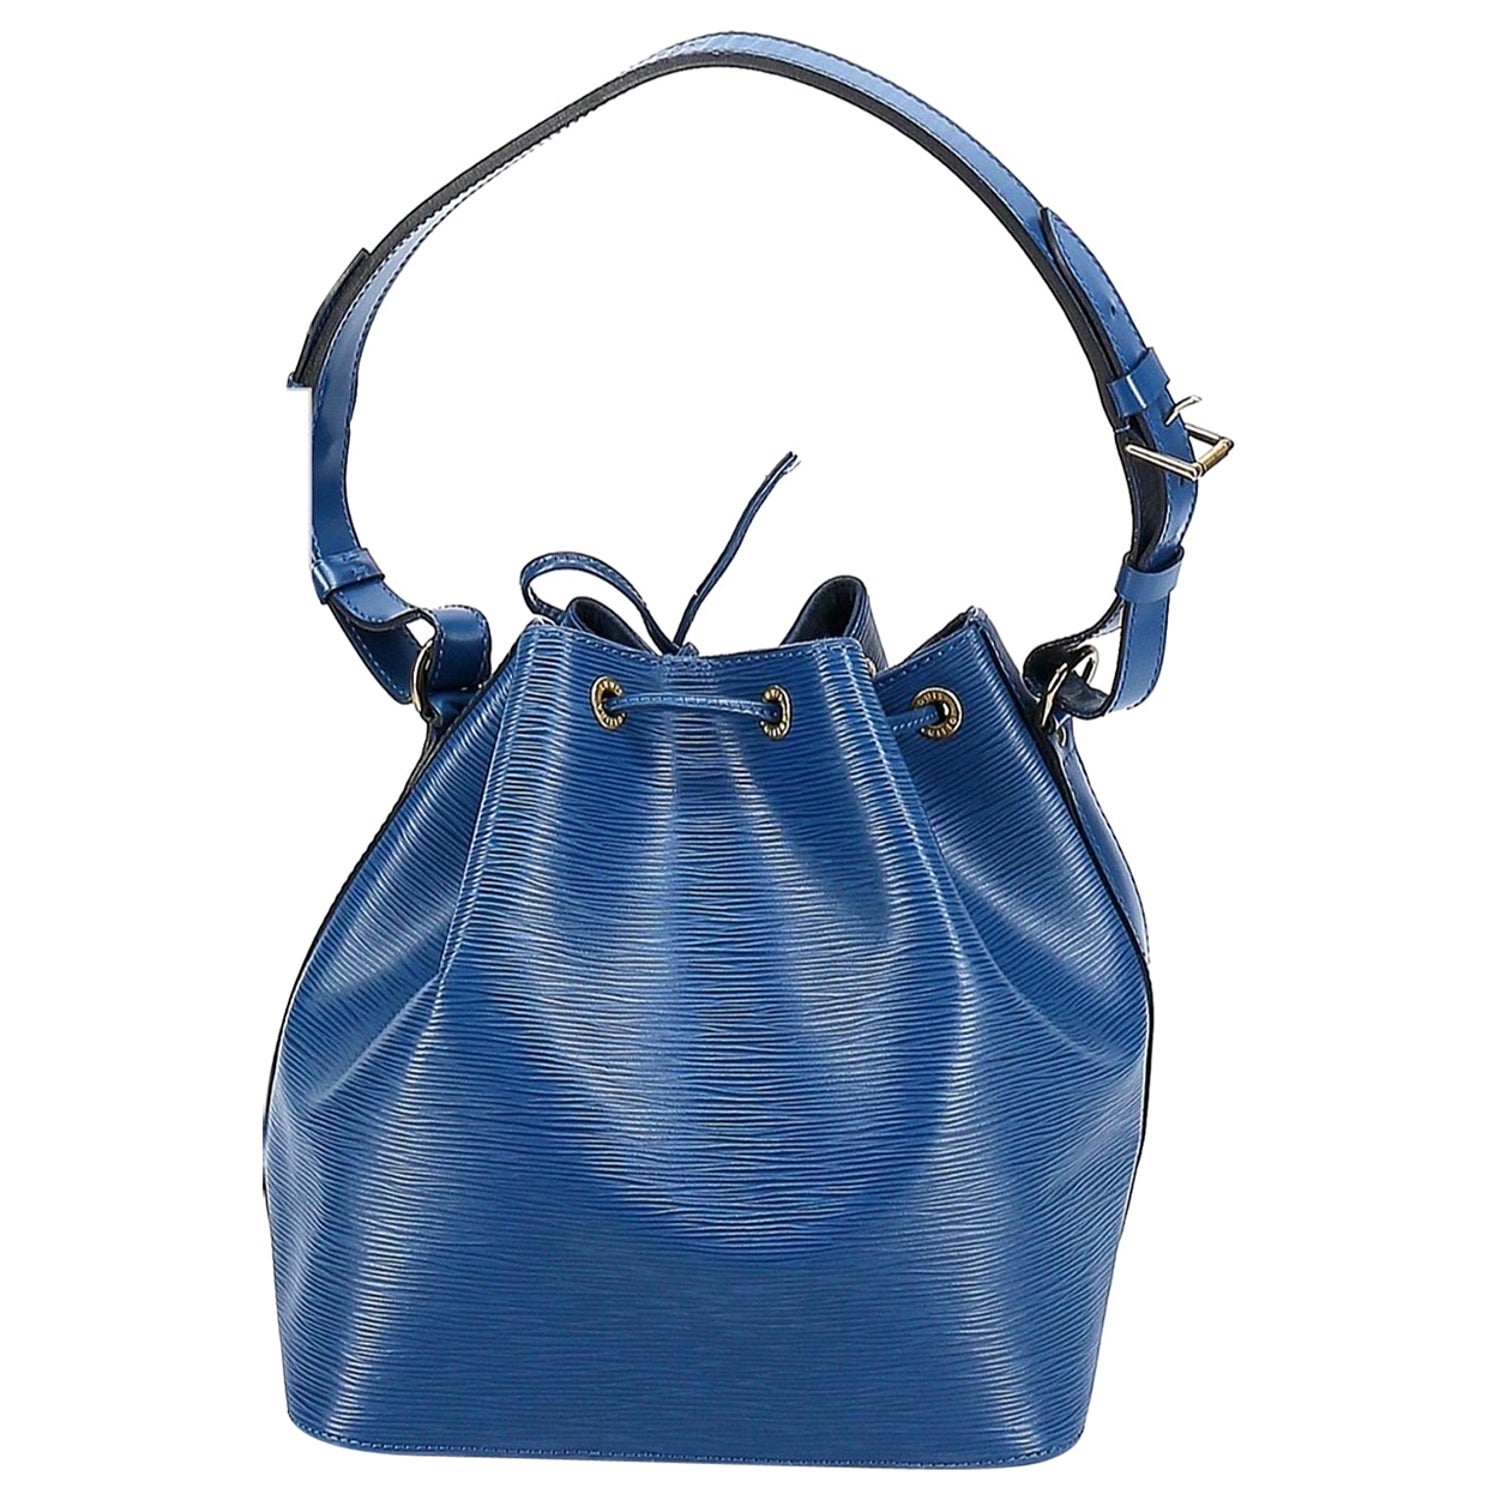 Blue Louis Vuitton Bucket Bag - 7 For Sale on 1stDibs